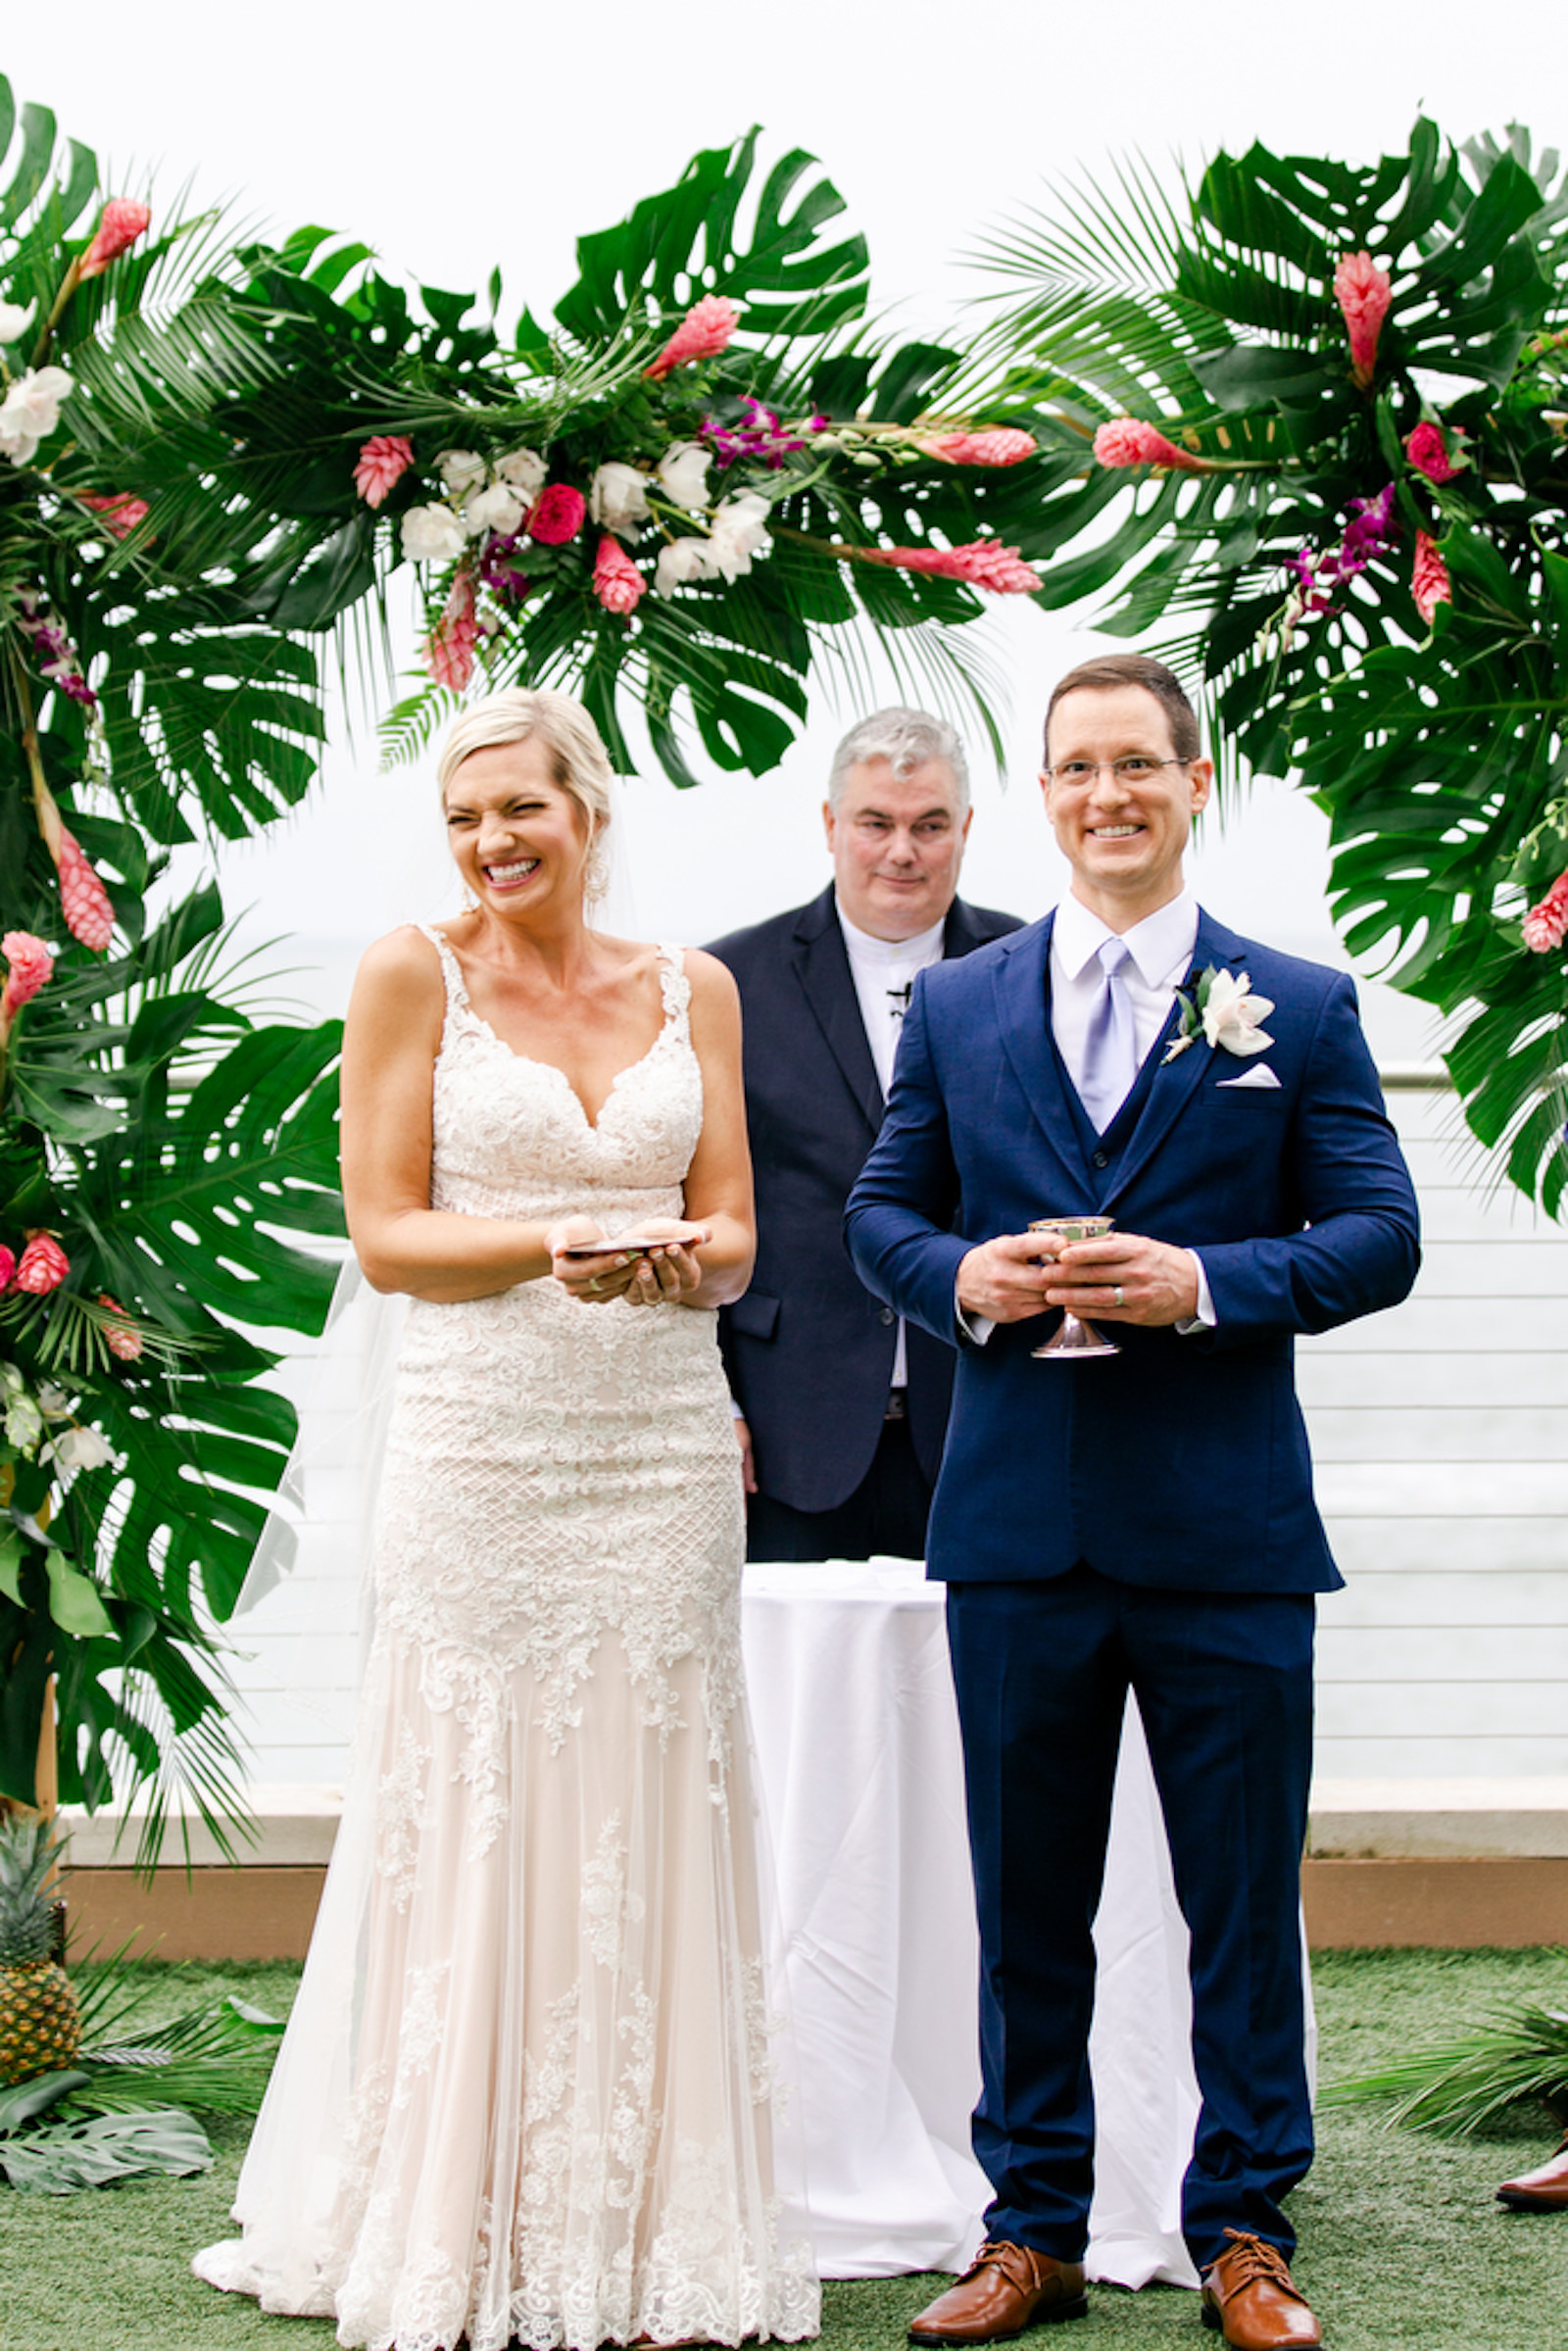 Tropical Elegant Wedding Ceremony, Bride and Groom Exchanging Wedding Vows Under Arch with Monstera Palm Tree Leaves, Pink Ginger, Purple and White Floral Arrangements | Tampa Bay Wedding Planner Special Moments Event Planning | Waterfront Clearwater Beach Opal Sands Resort